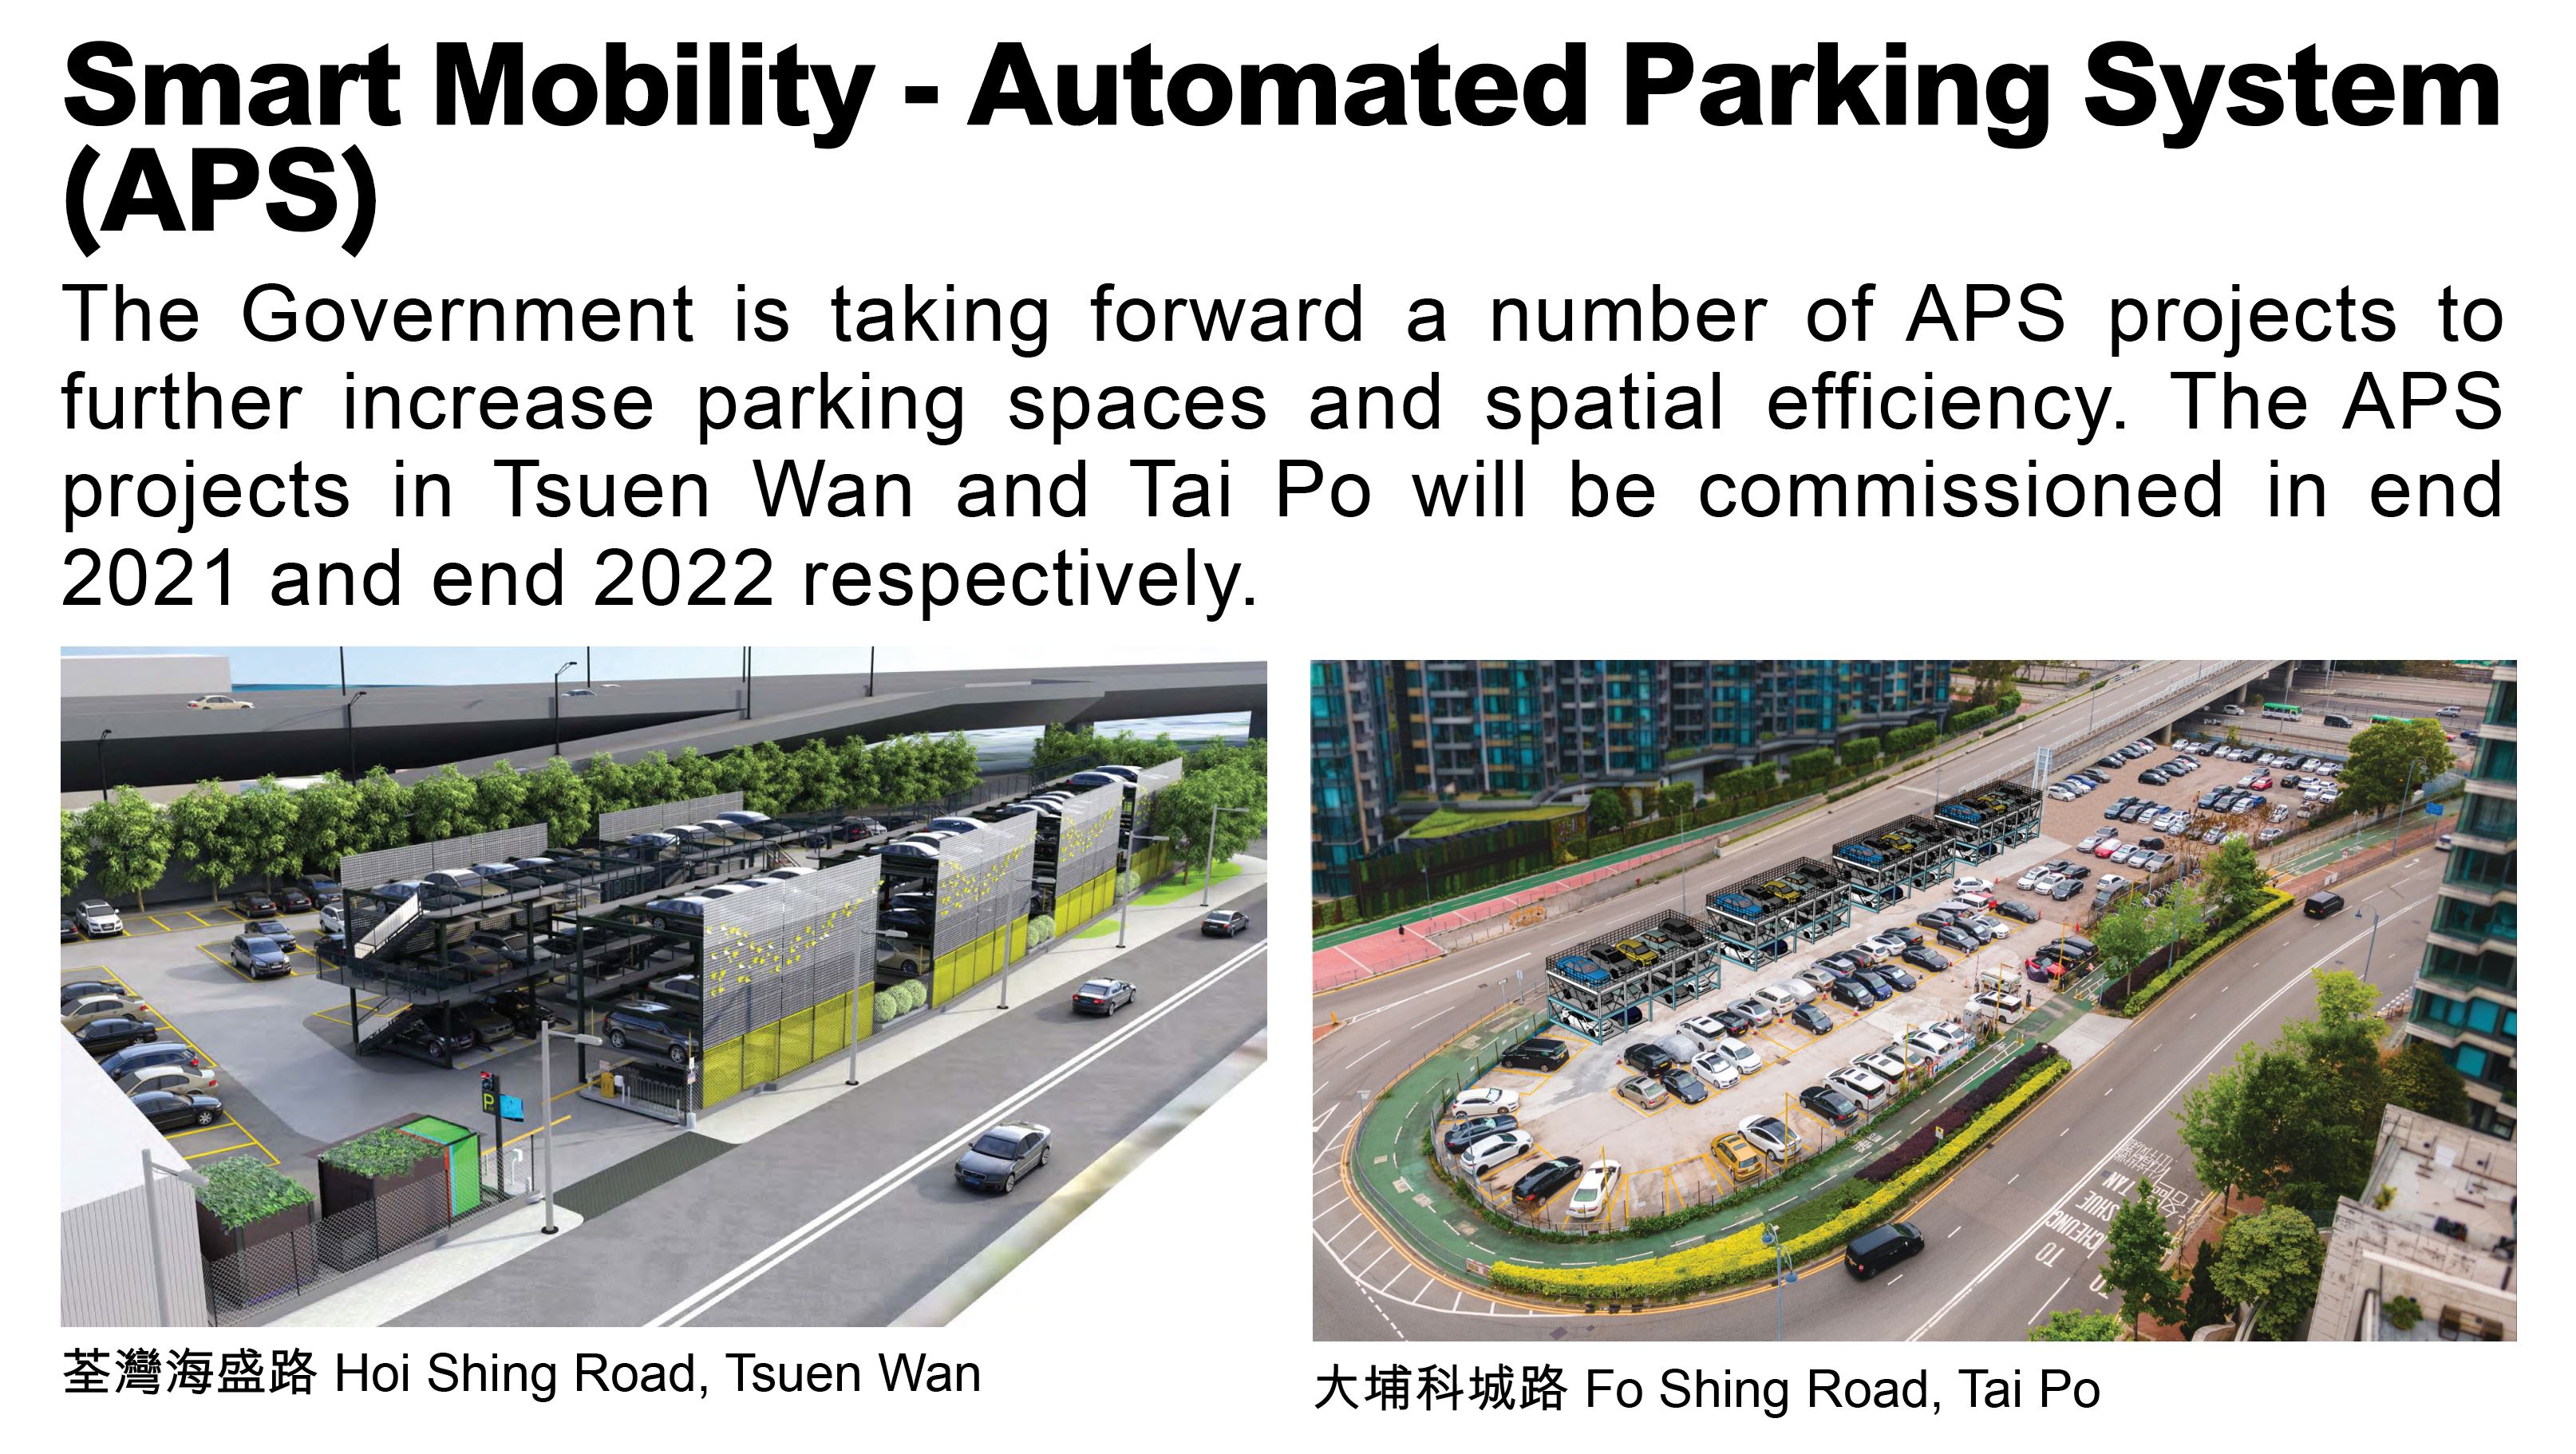 Smart Mobility - Automated Parking System (APS), The Government is taking forward a number of APS projects to further increase parking spaces and spatial efficiency. The APS projects in Tsuen Wan and Tai Po will be commissioned in end 2021 and end 2022 respectively.